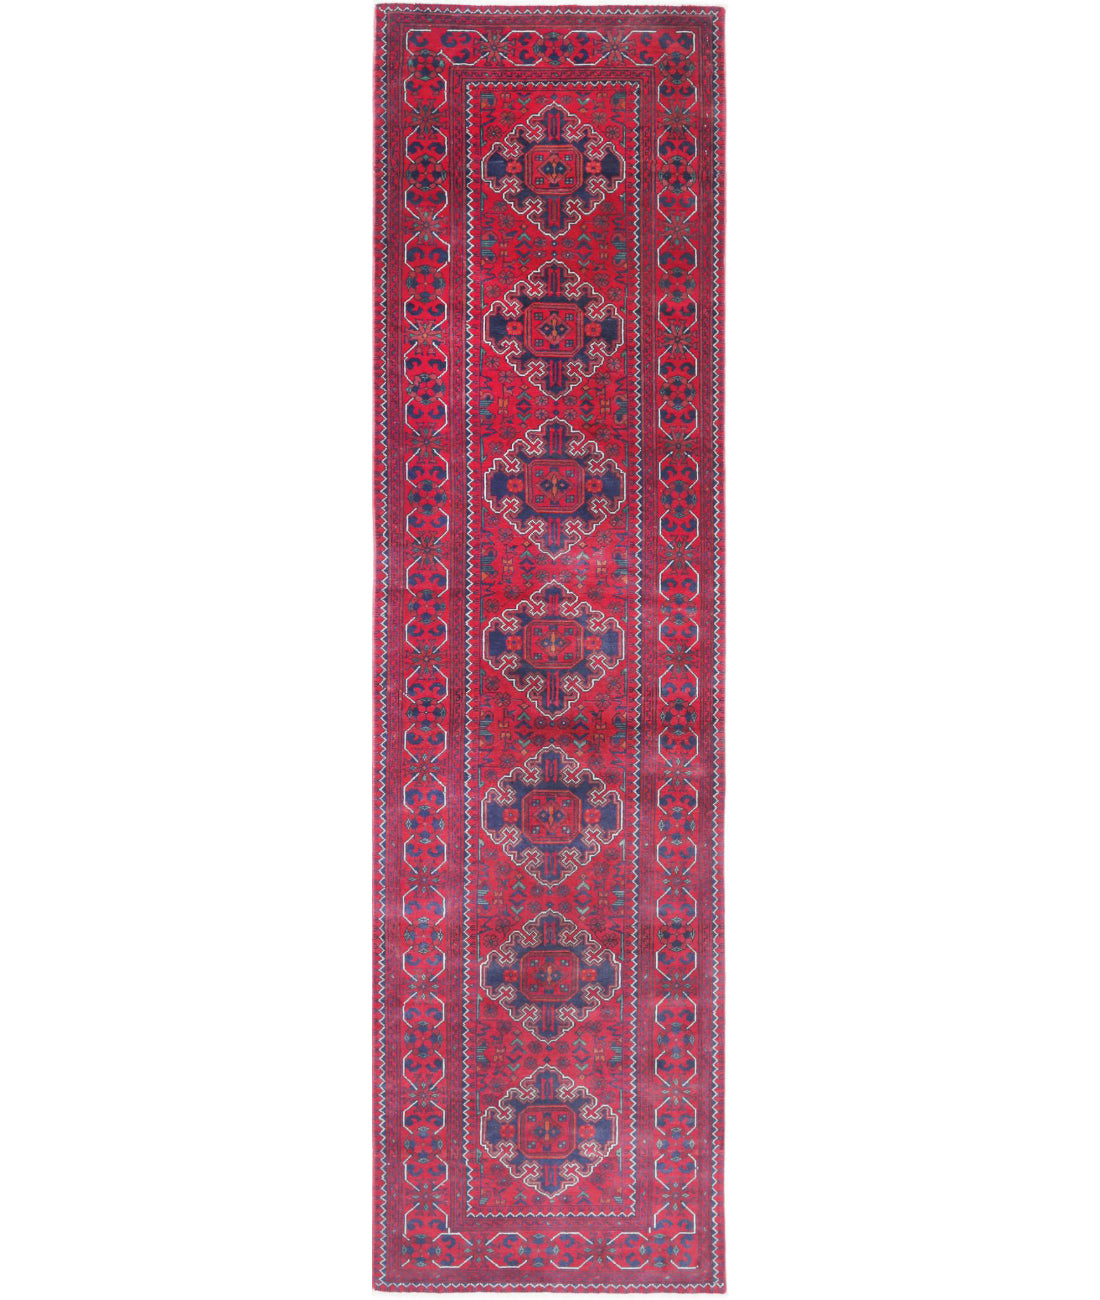 Afghan 2'6'' X 10'0'' Hand-Knotted Wool Rug 2'6'' x 10'0'' (75 X 300) / Red / Blue